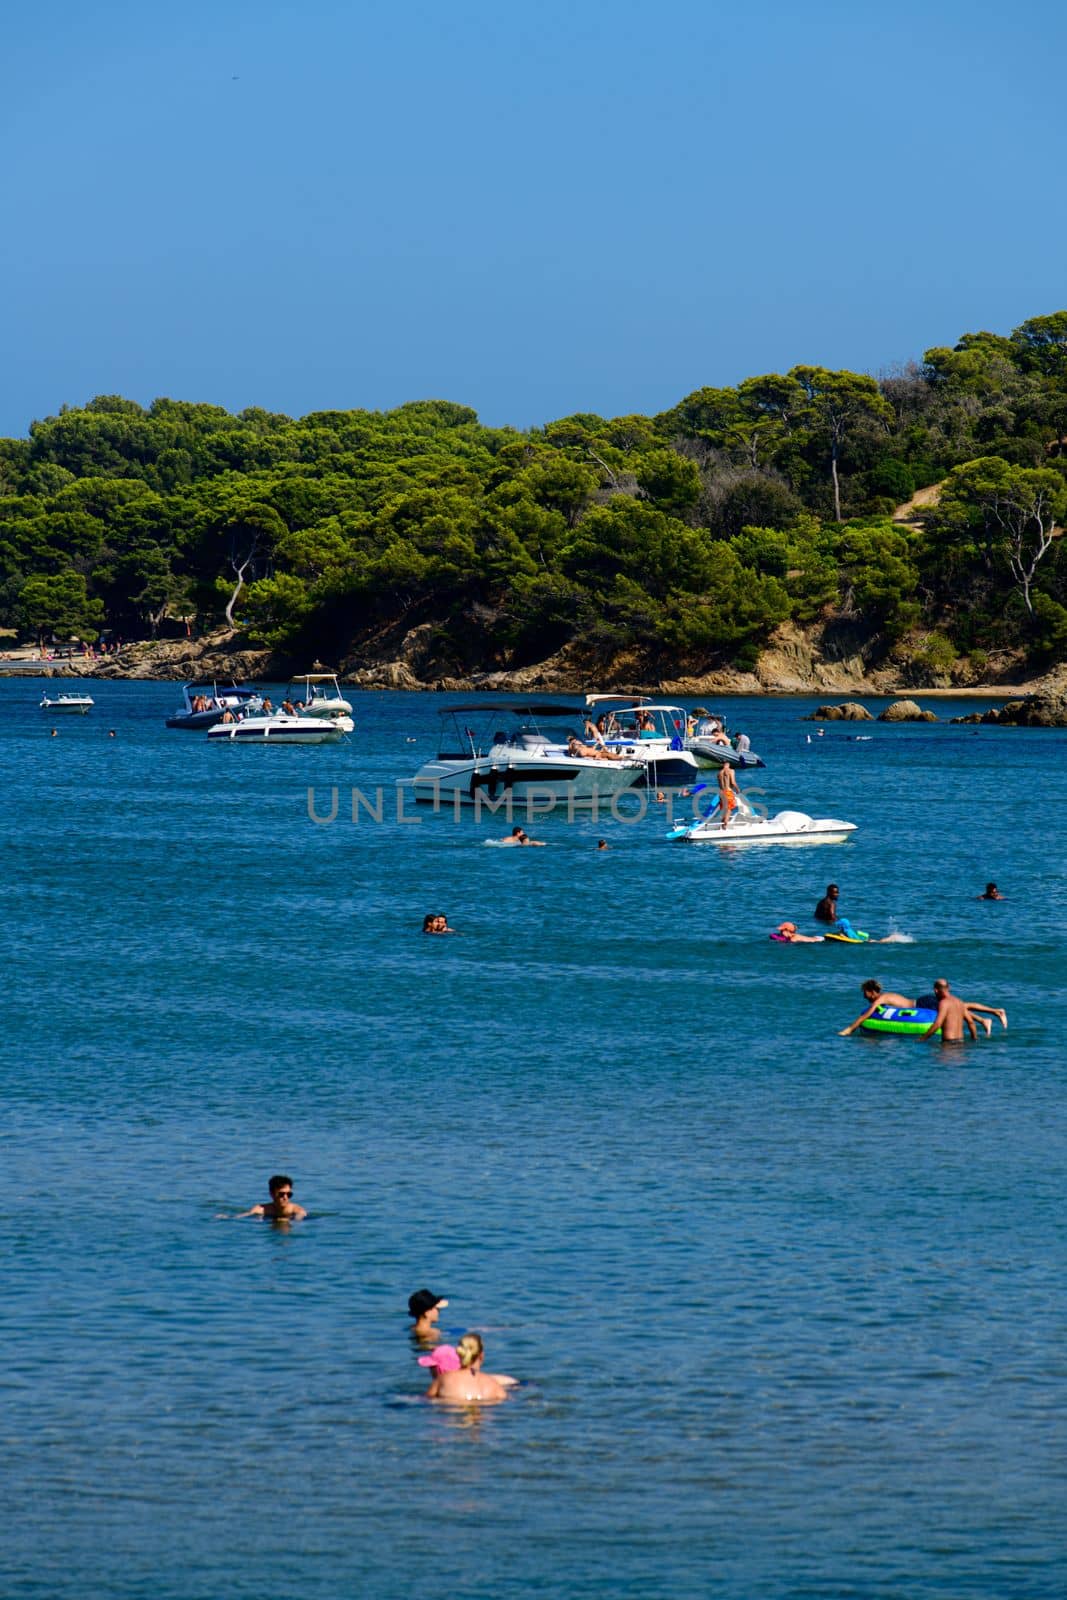 people playing in the mediterranean sea and jumping from boats on a sunny summerday against a rocky coastline